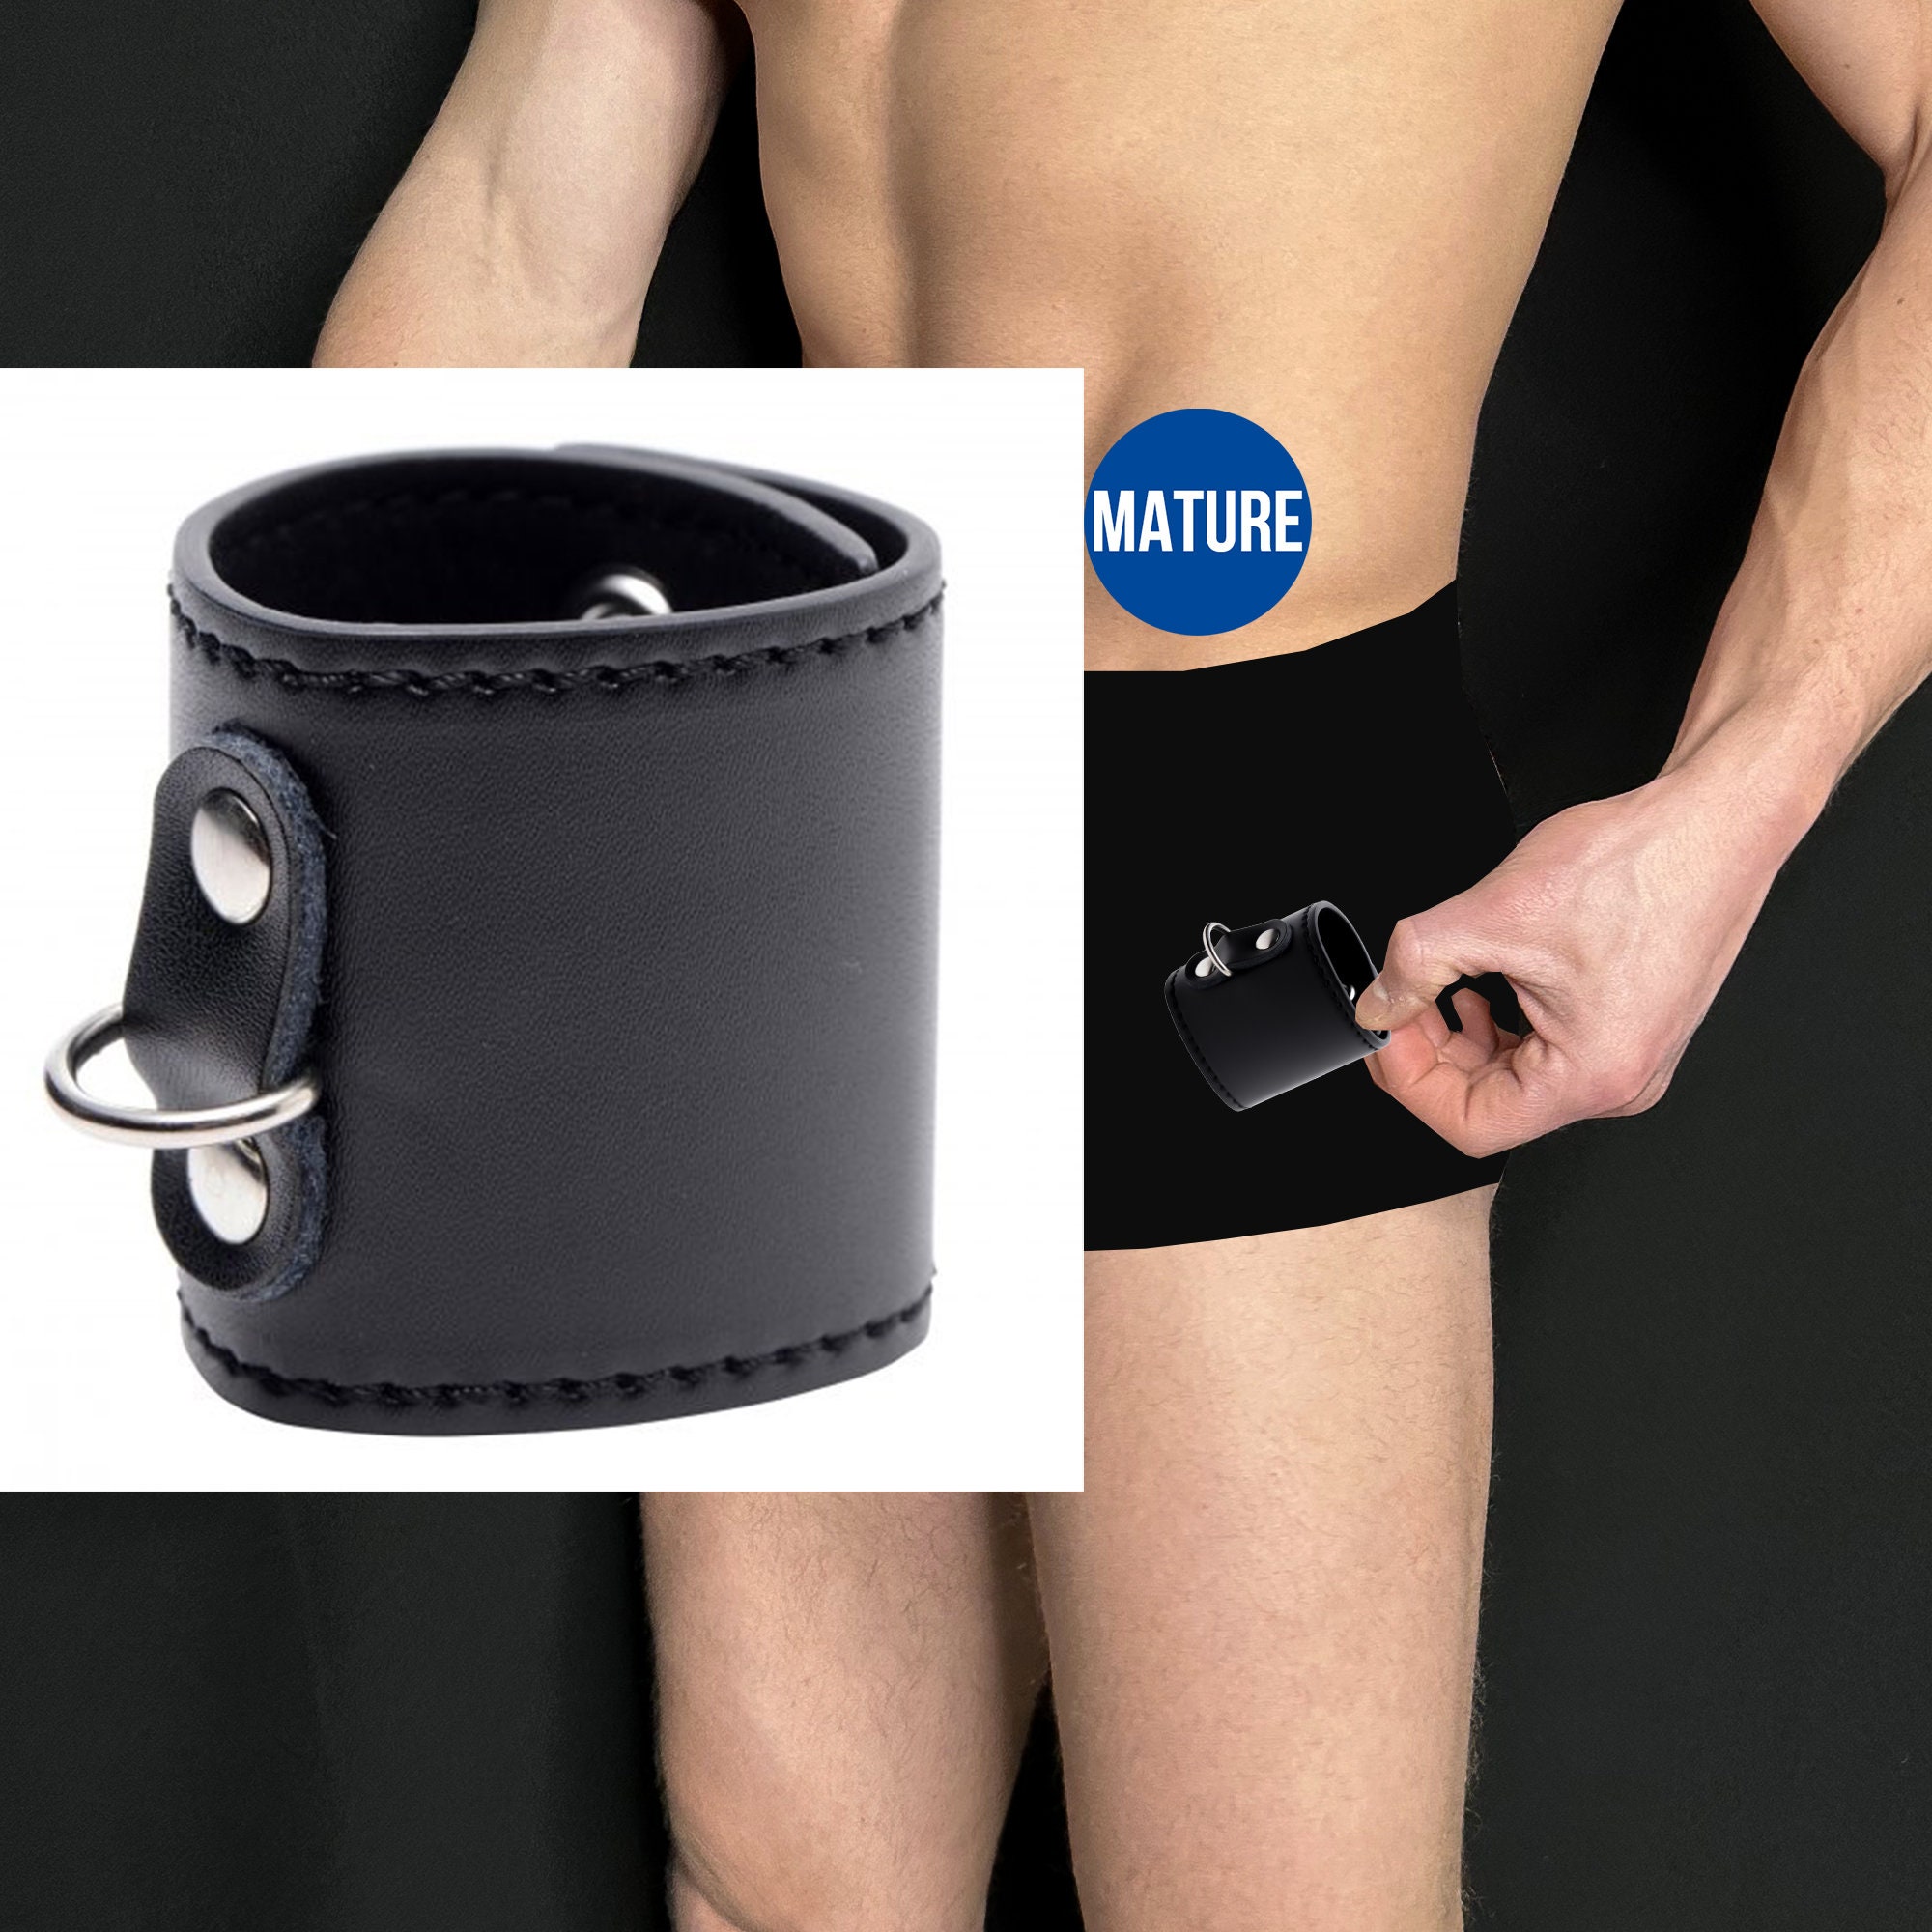 D-ring Leather Ball Stretcher, Adjustable Testicles Ring, Delay